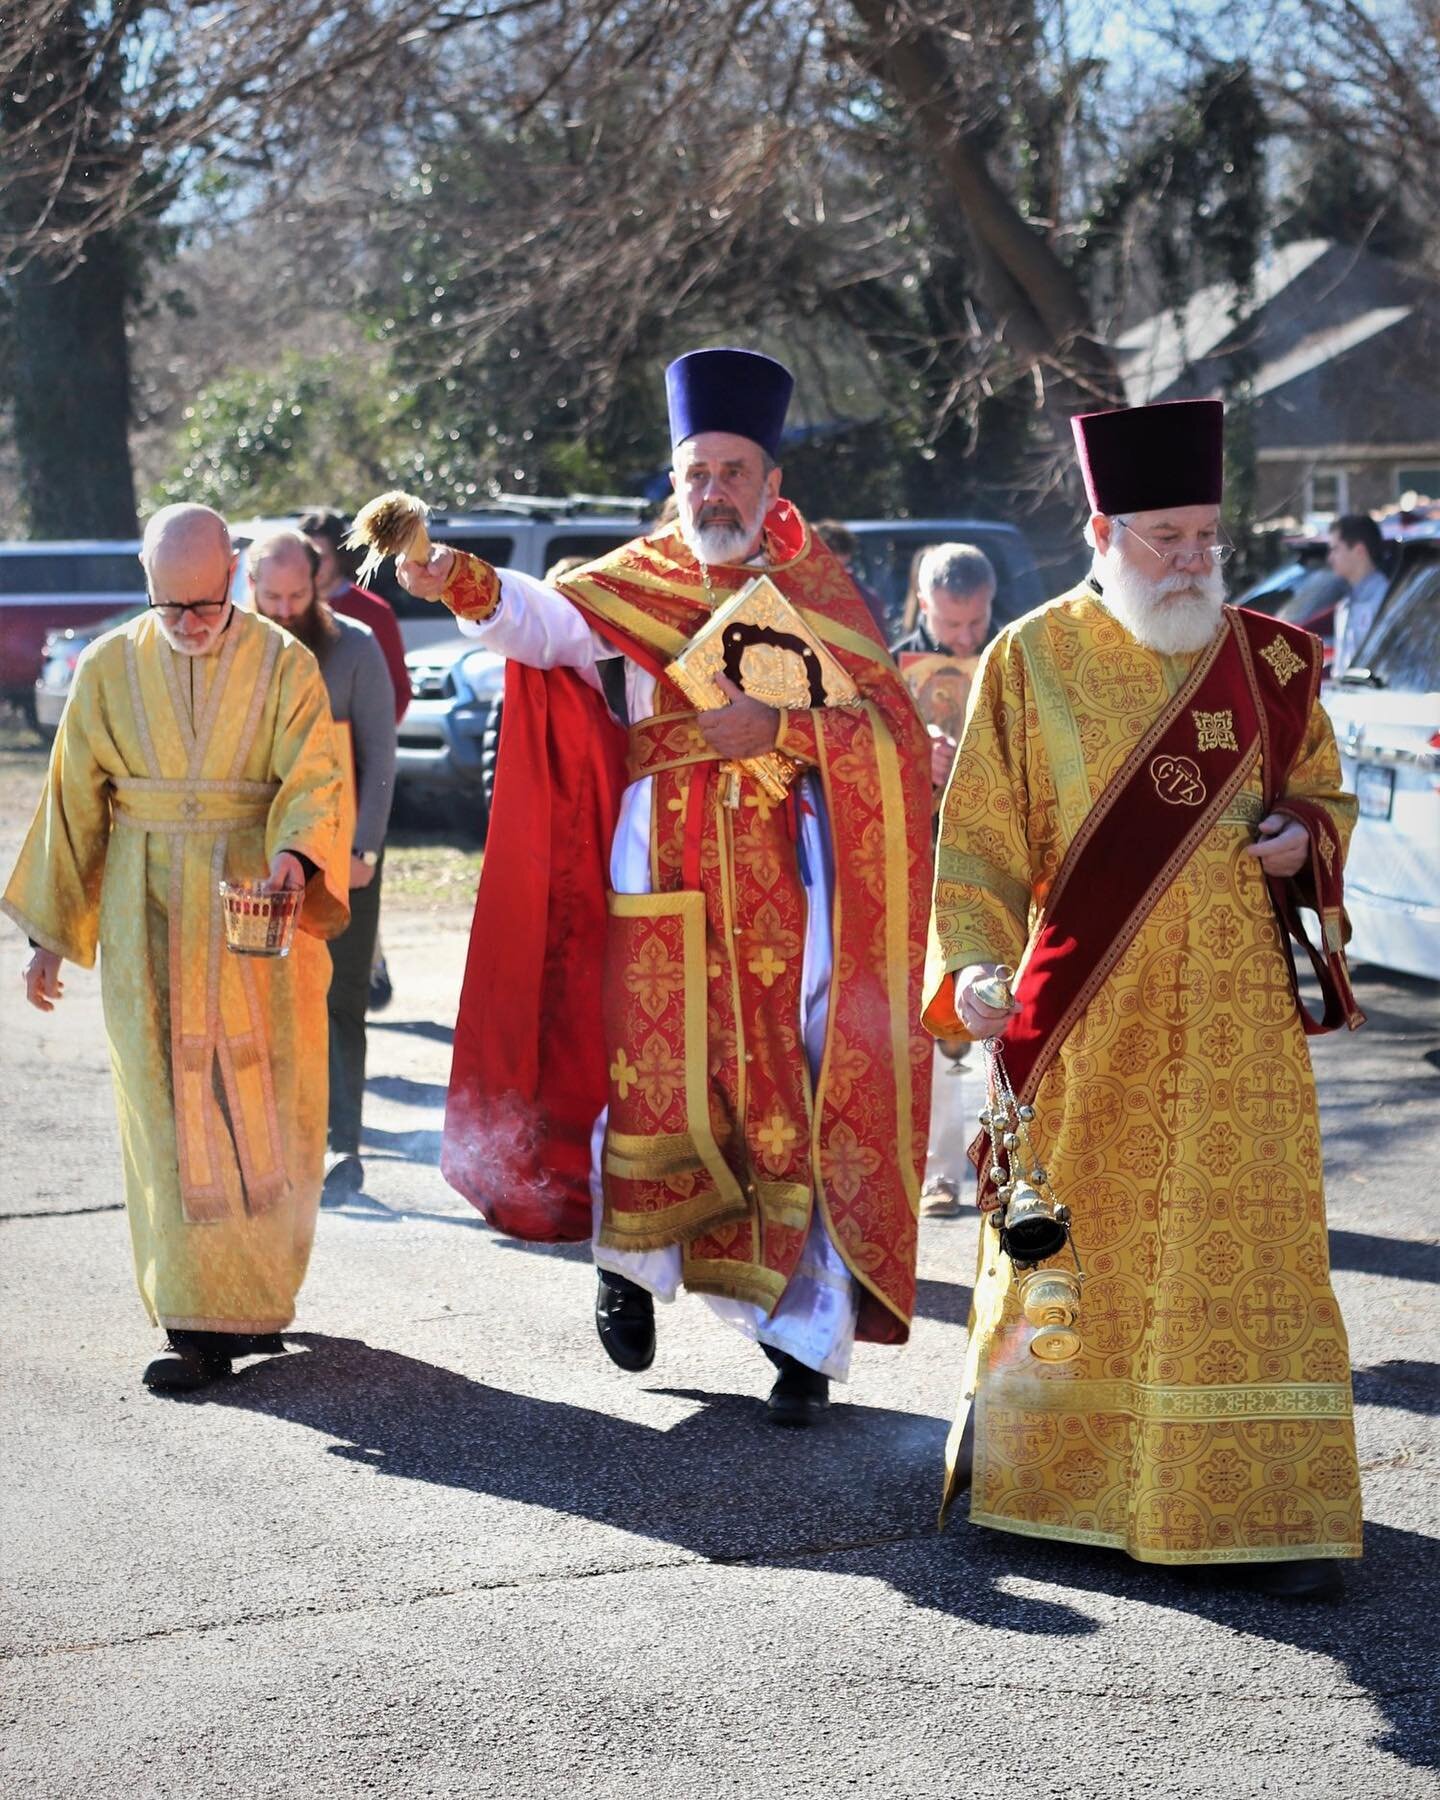 52 Weeks of Orthodoxy: A photo a week from our life in Christ in the Orthodox Church 

https://www.engageorthodoxy.net/52weeksoforthodoxy/procession